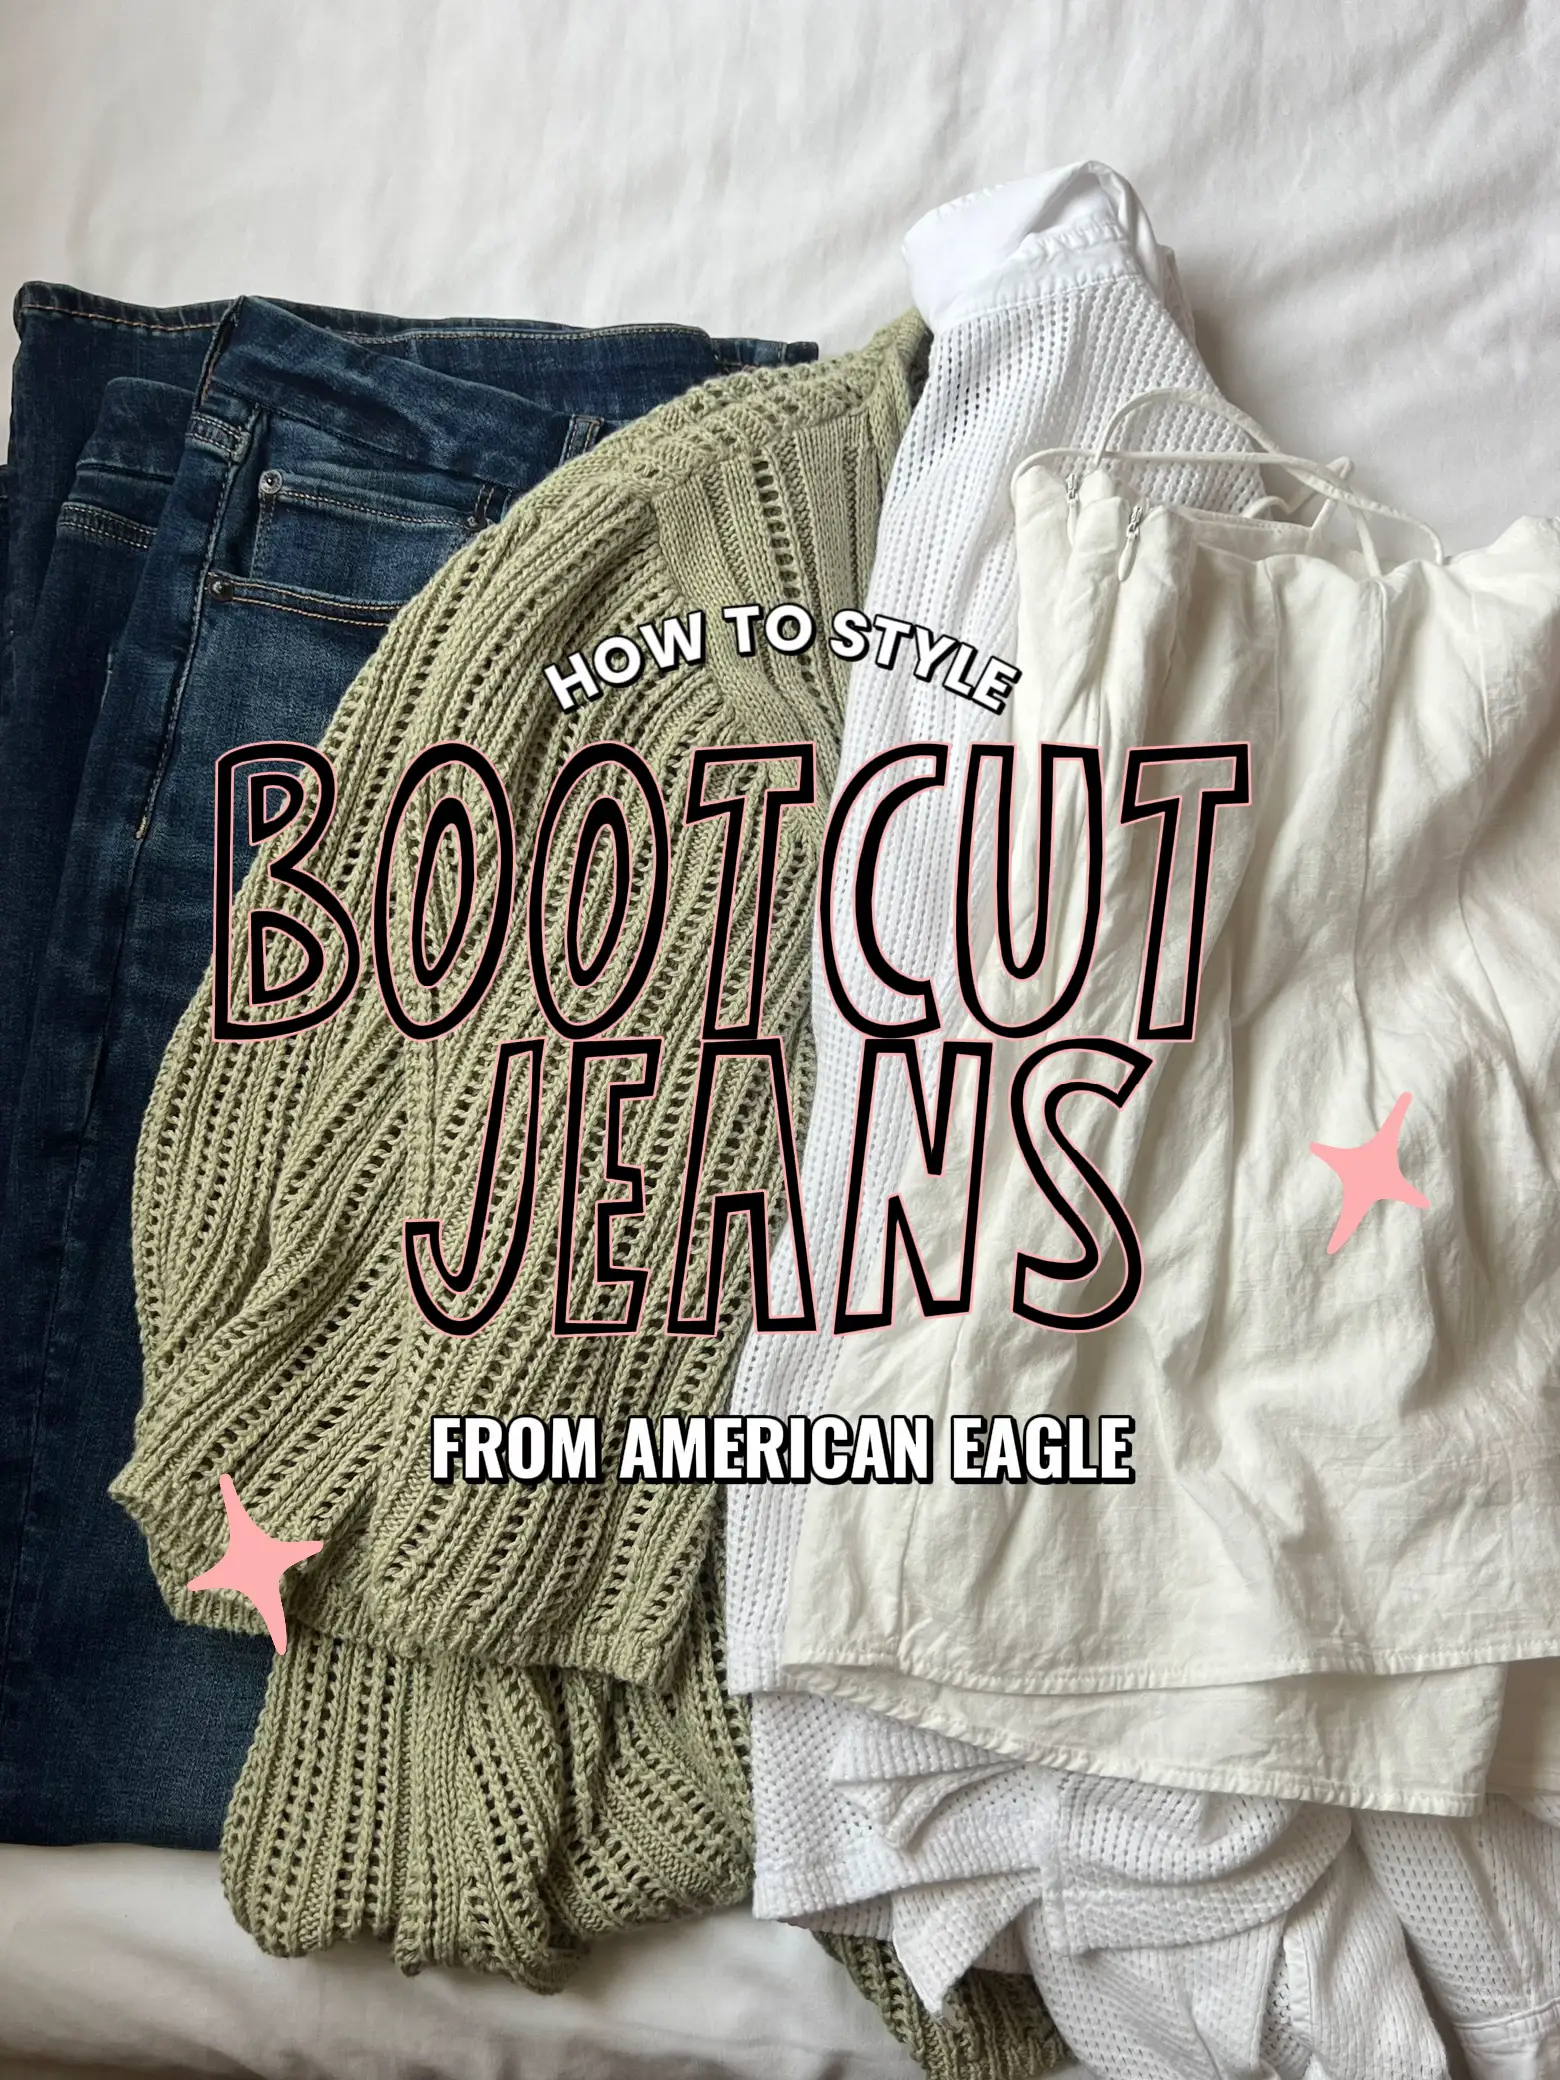 PacSun Brown Corduroy High Waisted Bootcut Jeans